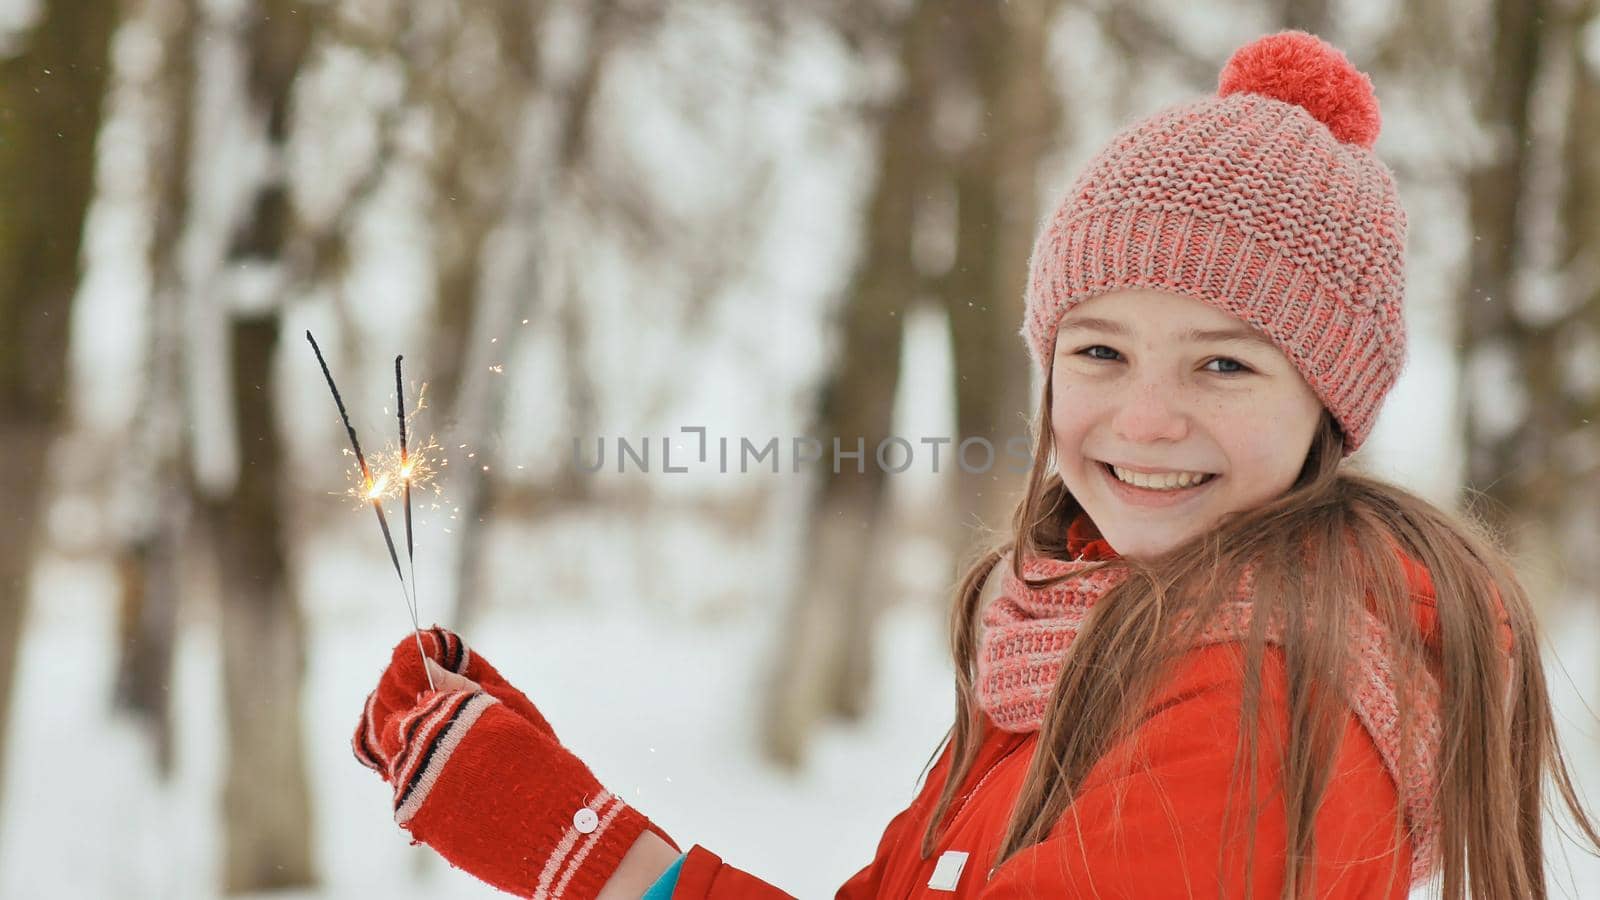 The charming young schoolgirl joyfully holds in her hands a packaged box with a gift in the winter forest. In anticipation of the New Year holidays